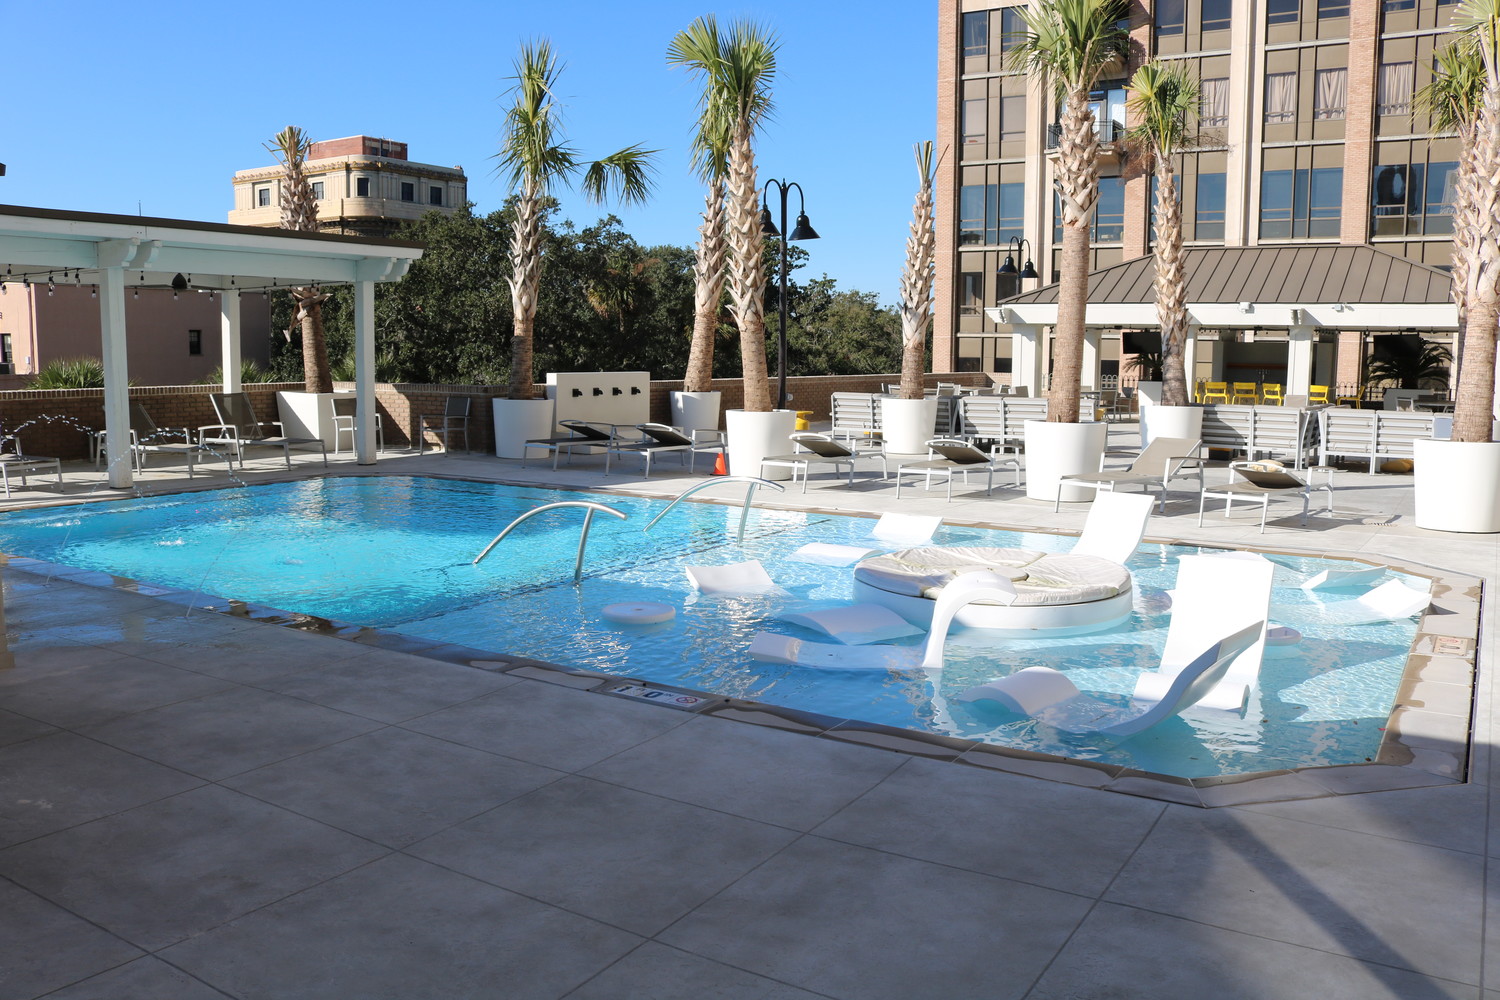 The DeSoto features a rooftop pool with fire pits, fountains and a cabana bar.